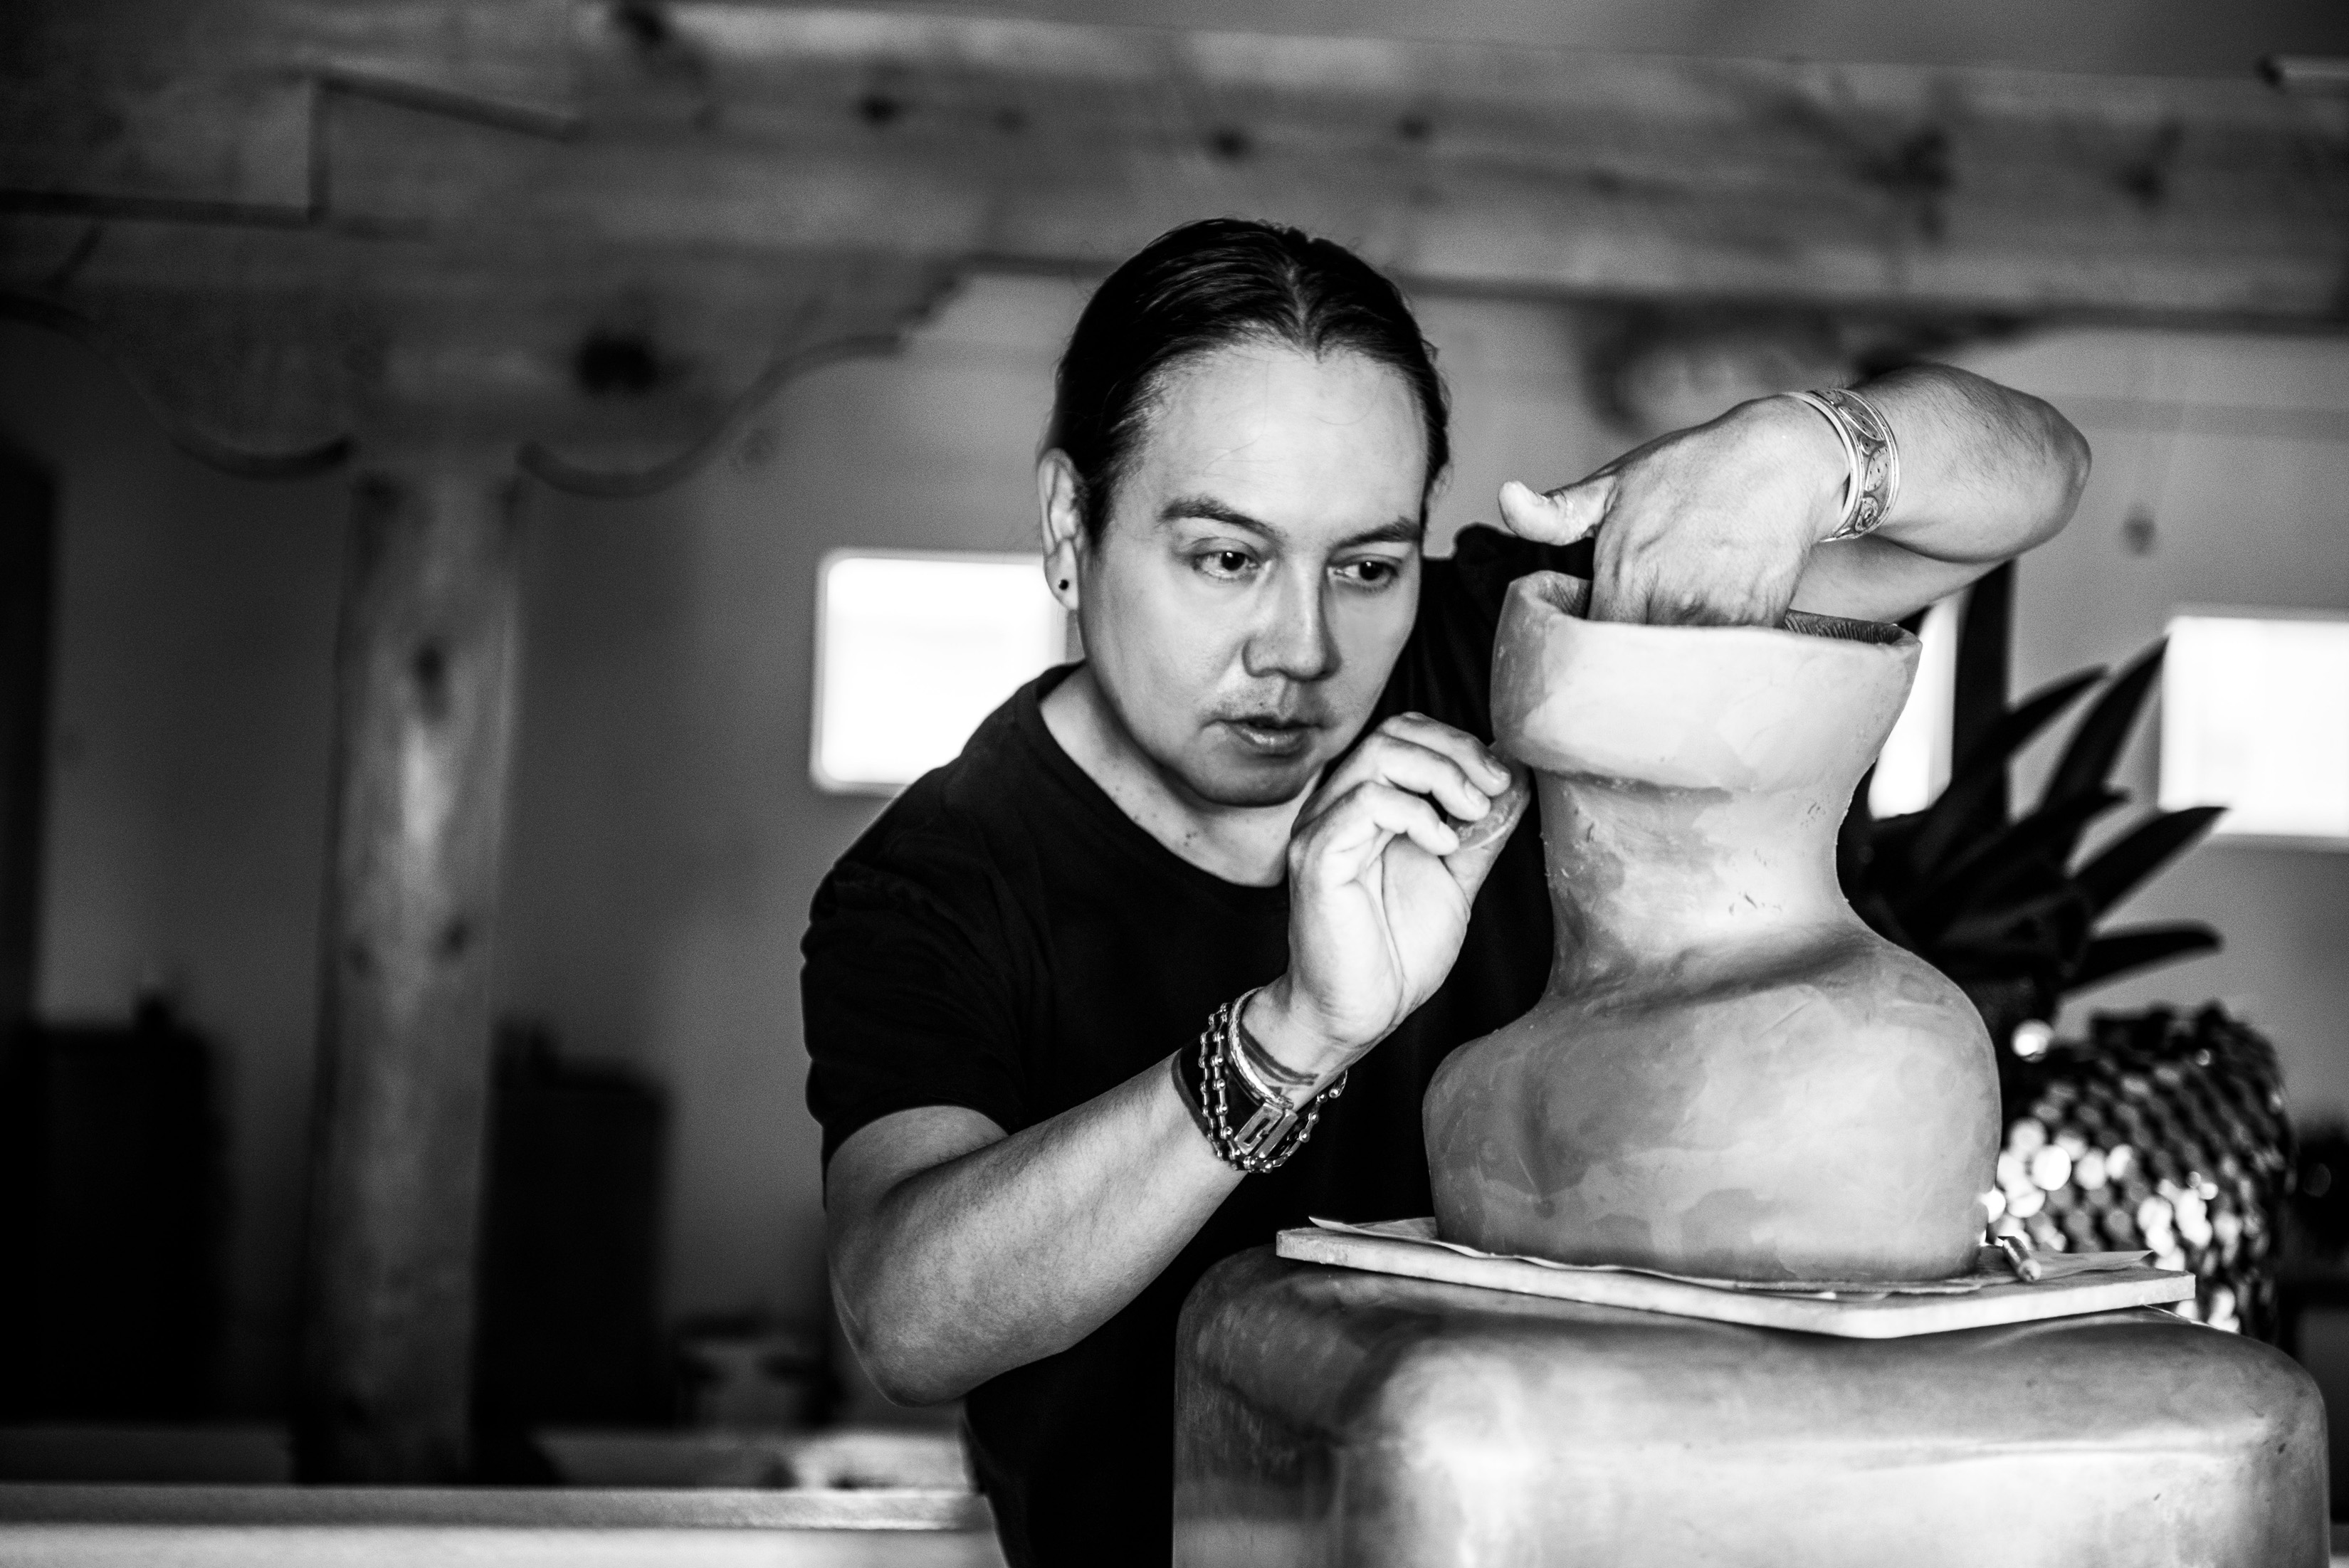 I'm an image! Virgil Ortiz sculpting clay by hand in his studio. Ortiz is focused on his work and not looking at the camera.